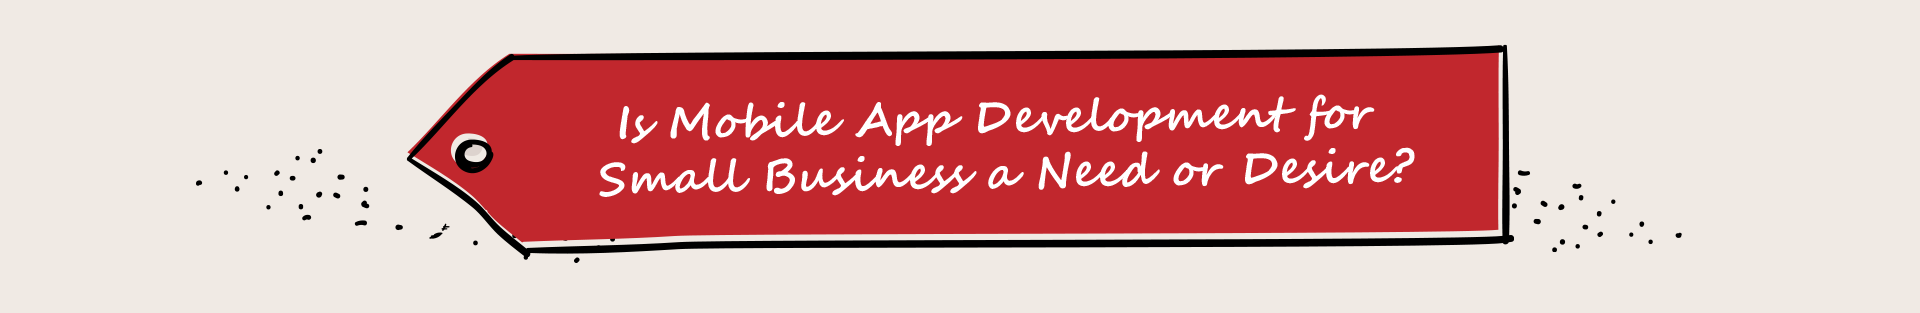 Is Mobile App Development for Small Business a Need or Desire